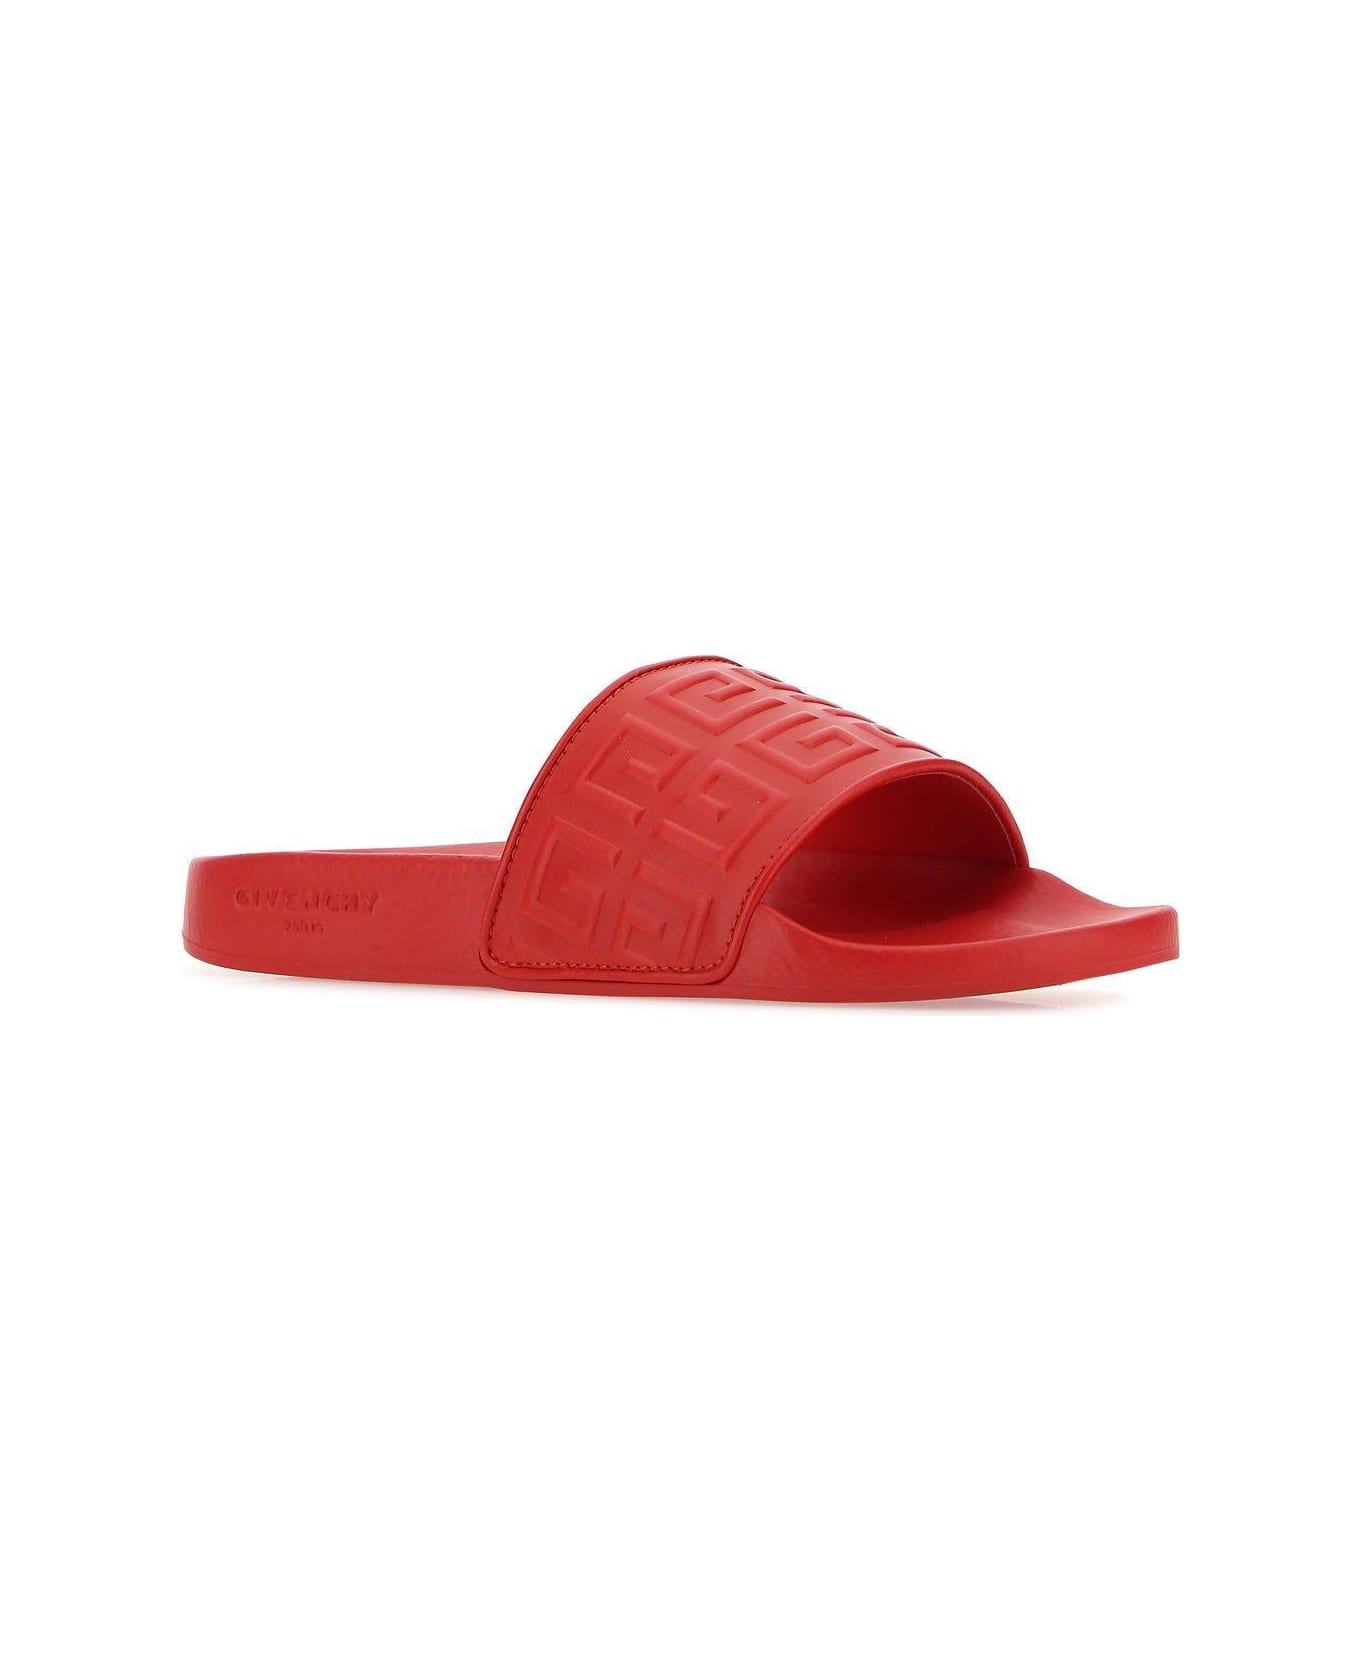 Givenchy Red Leather 4g Slippers - RED